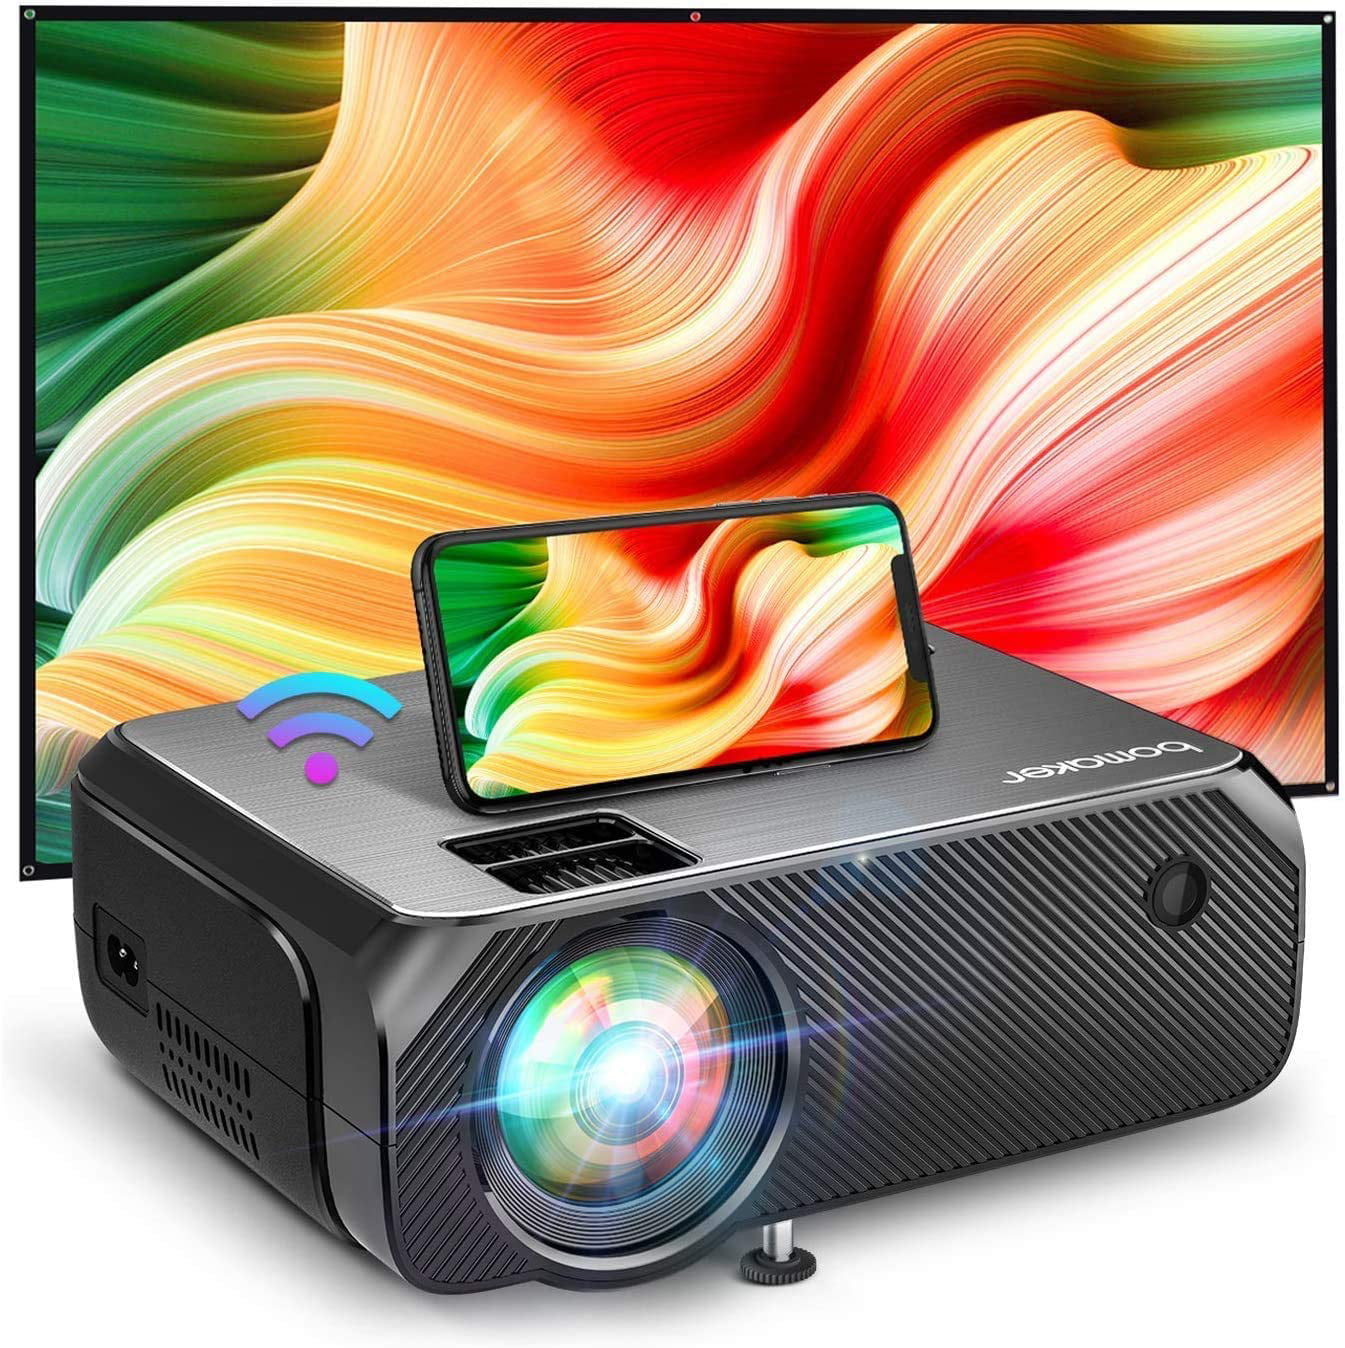 【2021 Latest Version】Portable Projector,Portable Home Theater Projector  Wi-Fi Mini Projector，Video Projector Outdoor Movie Projector